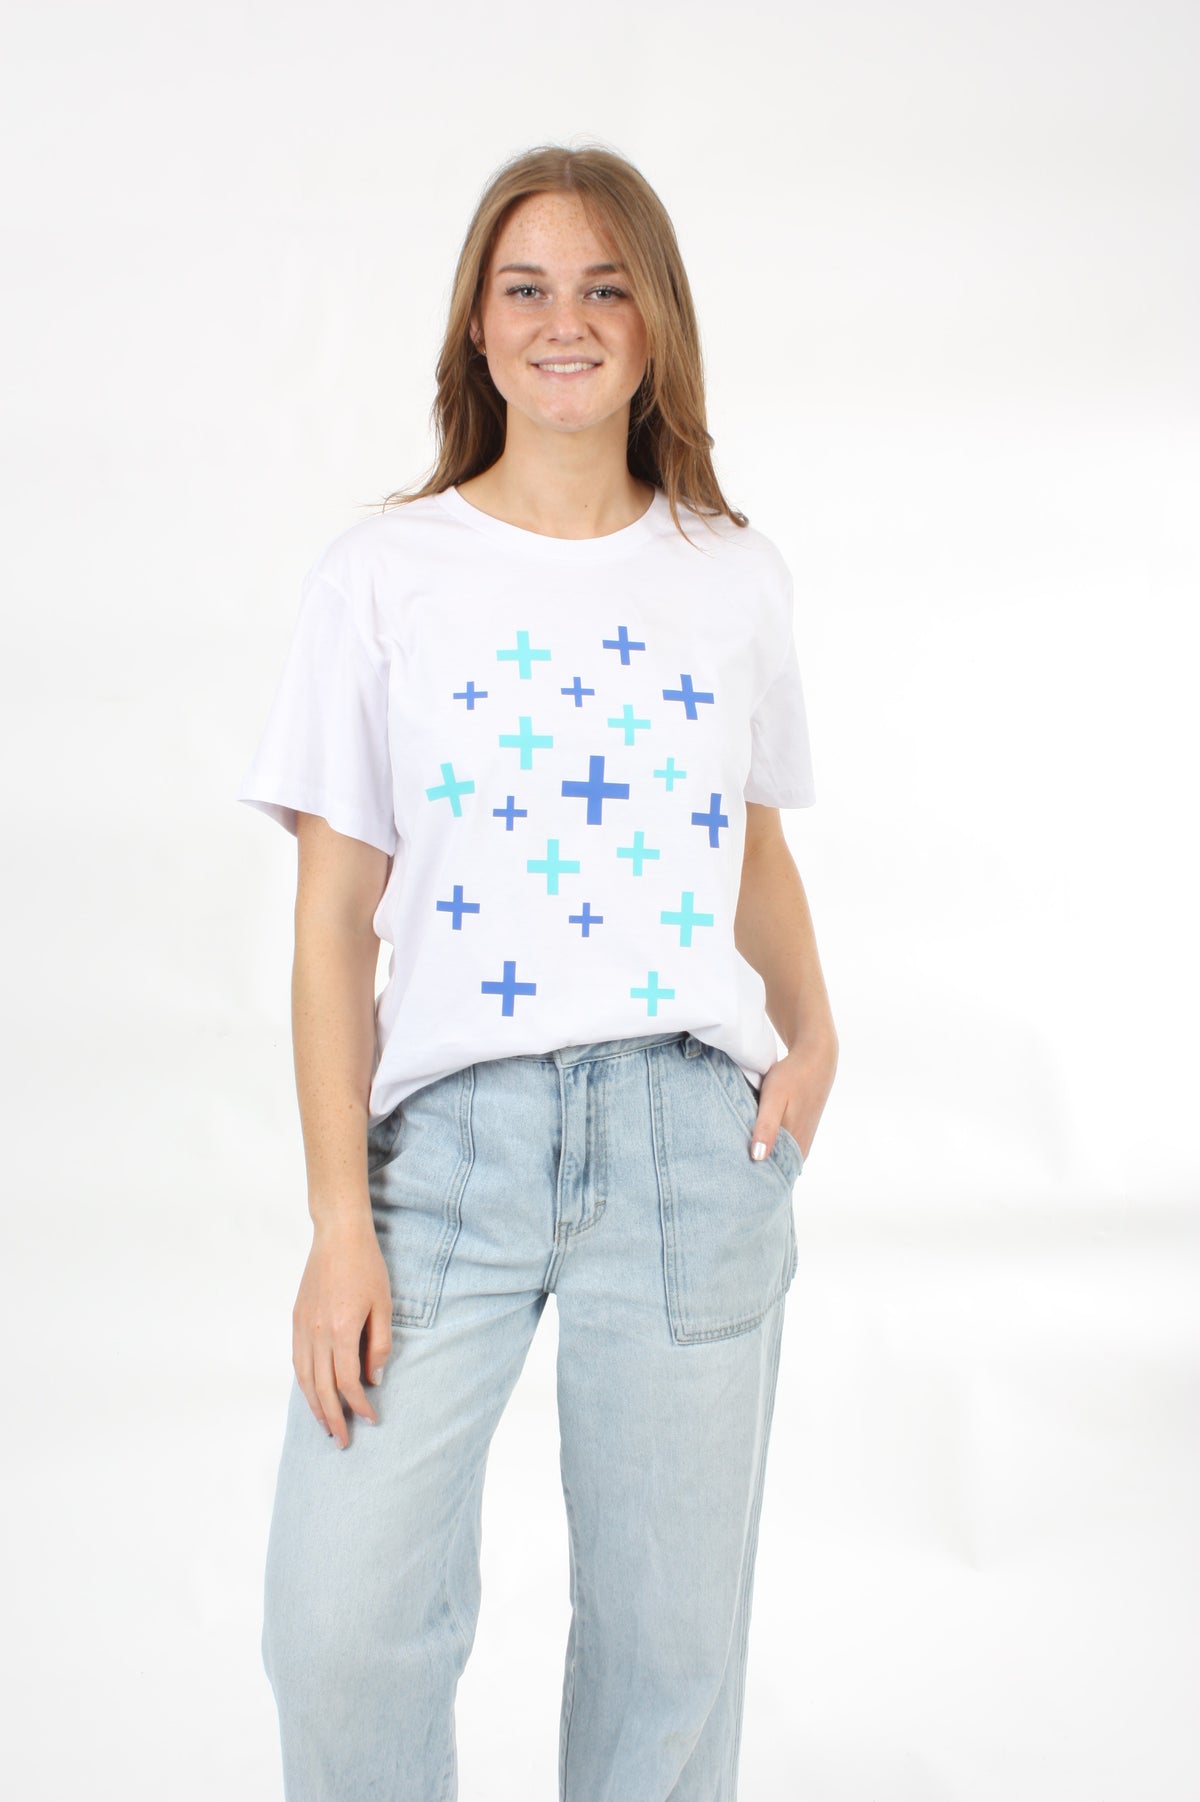 Tee Shirt - White - Blue and Turquoise scattered Crosses Print - Pre Order